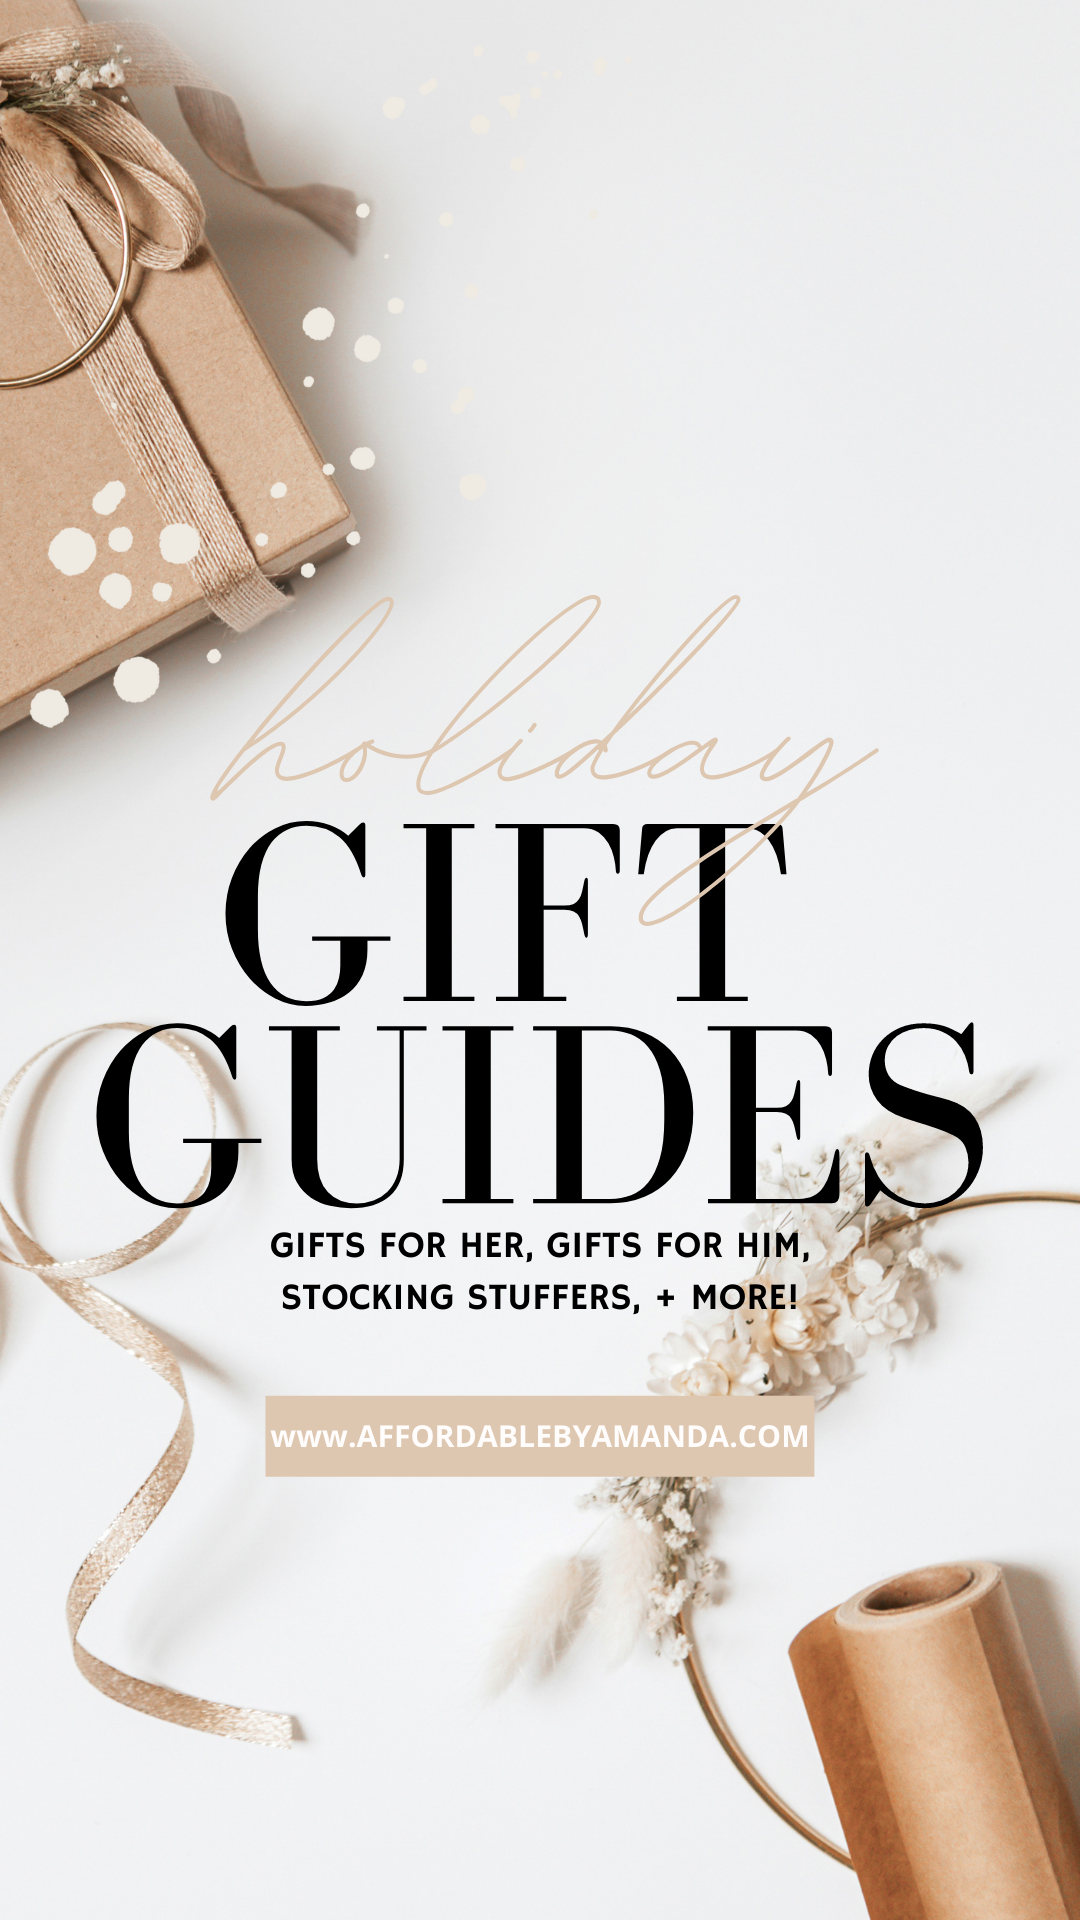 Best Holiday Gift Guides. Gifts for Her. Gifts for Men. Holiday Gift Guides. Holiday Gifts for Her Under $25. Ultimate Holiday Gift Guides